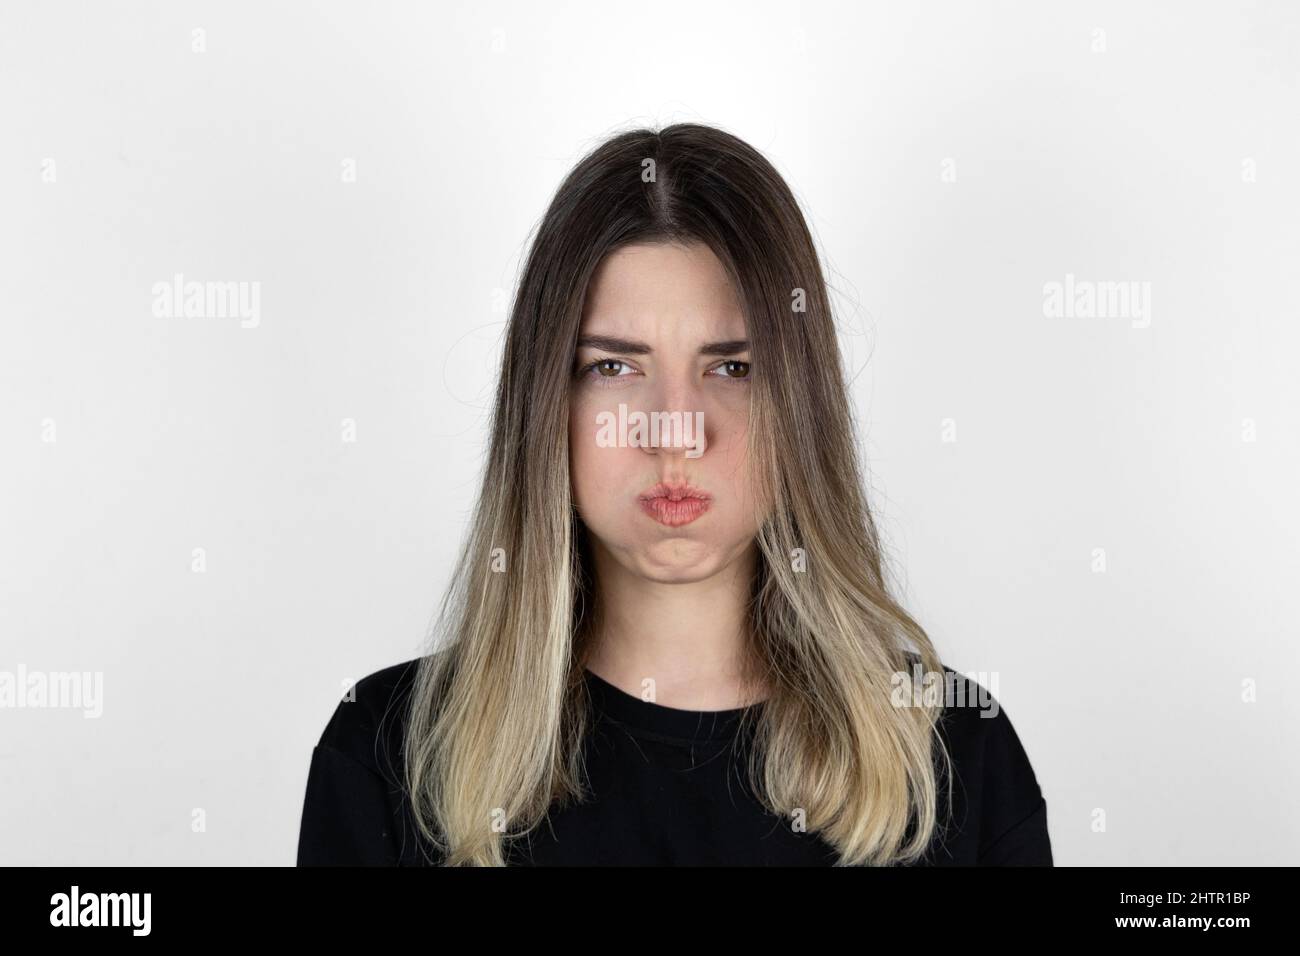 Close up photo of bored girl. She is blowing her cheek against white background. White background. Mouth inflated with air, crazy expression. Stock Photo